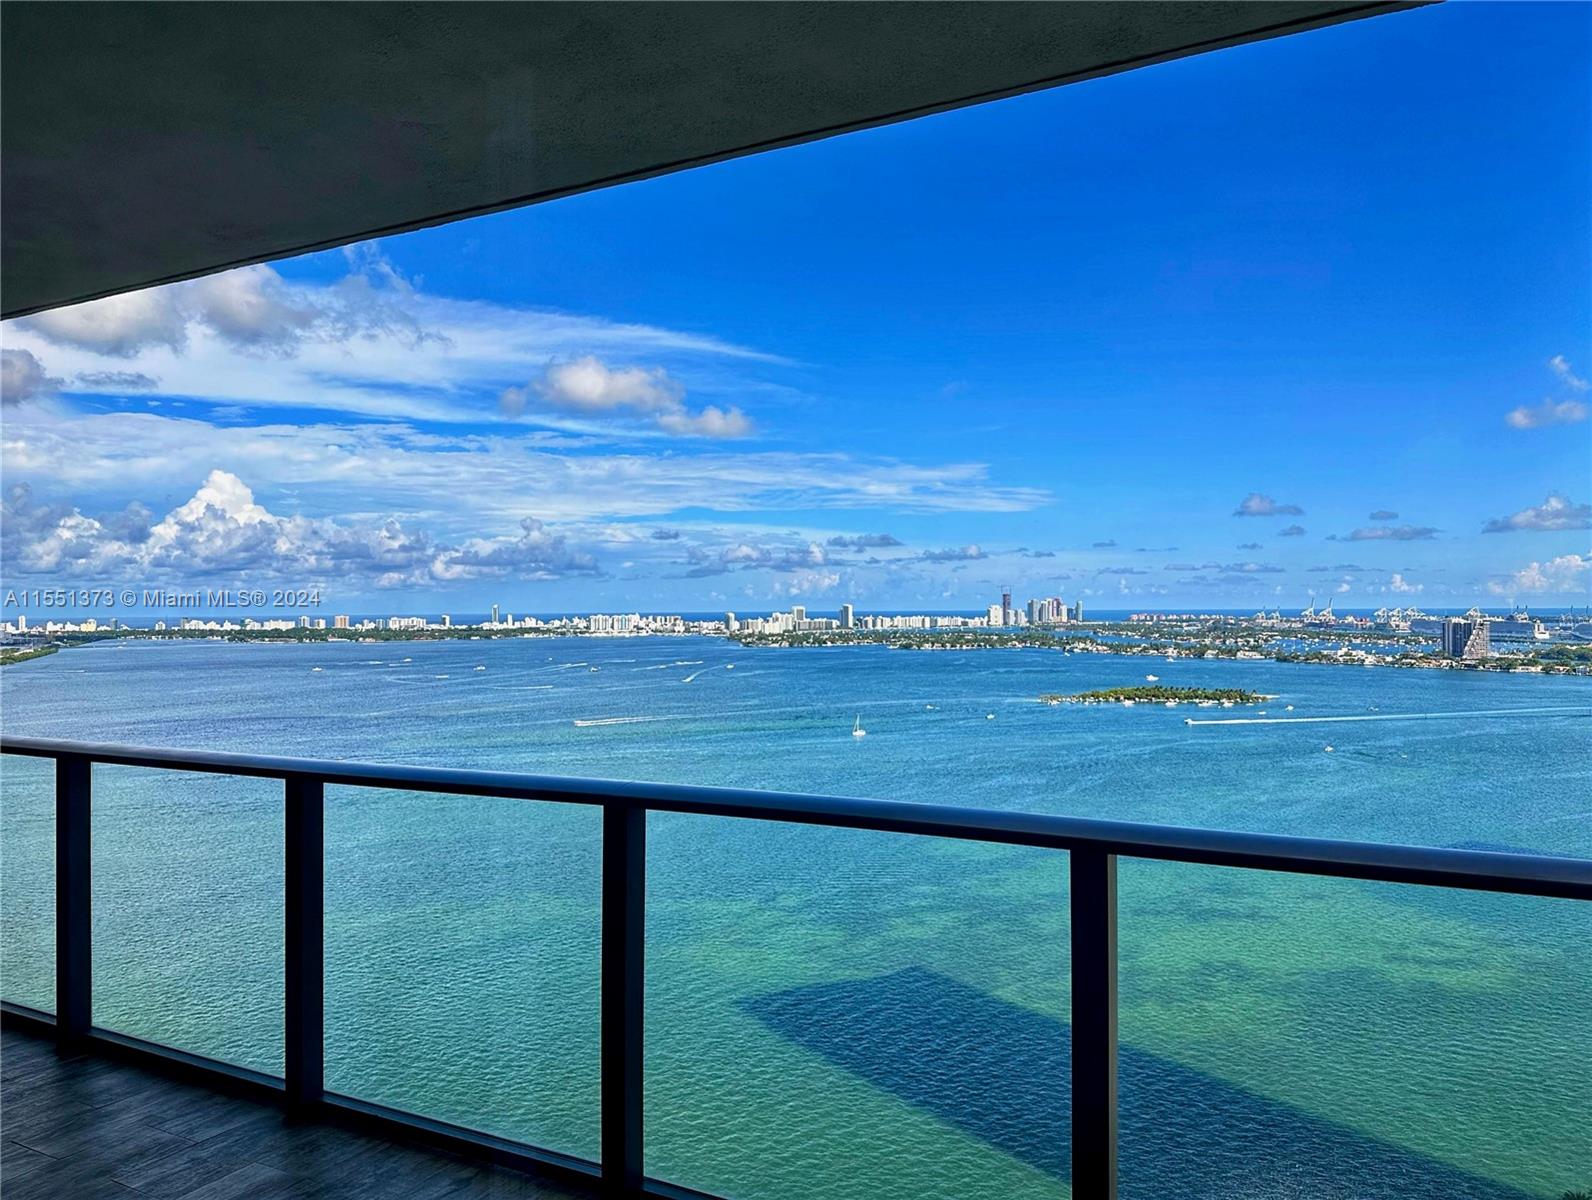 Welcome to your luxurious waterfront retreat in Miami! This stunning condo boasts breathtaking views of the sparkling bay, ocean and city skyline. With floor-to-ceiling windows and a spacious balcony, you'll experience the epitome of waterfront living. Step inside to discover a meticulously designed interior featuring sleek finishes, modern appliances, and elegant touches throughout. Enjoy resort-style amenities including a waterfront pool, state-of-the-art fitness center, private marina access, and 24-hour concierge service. Experience the ultimate in Miami luxury living at this waterfront oasis. New refrigerator, dishwasher, new kitchen faucet, garbage disposal, new chandelier, new shower fixtures.